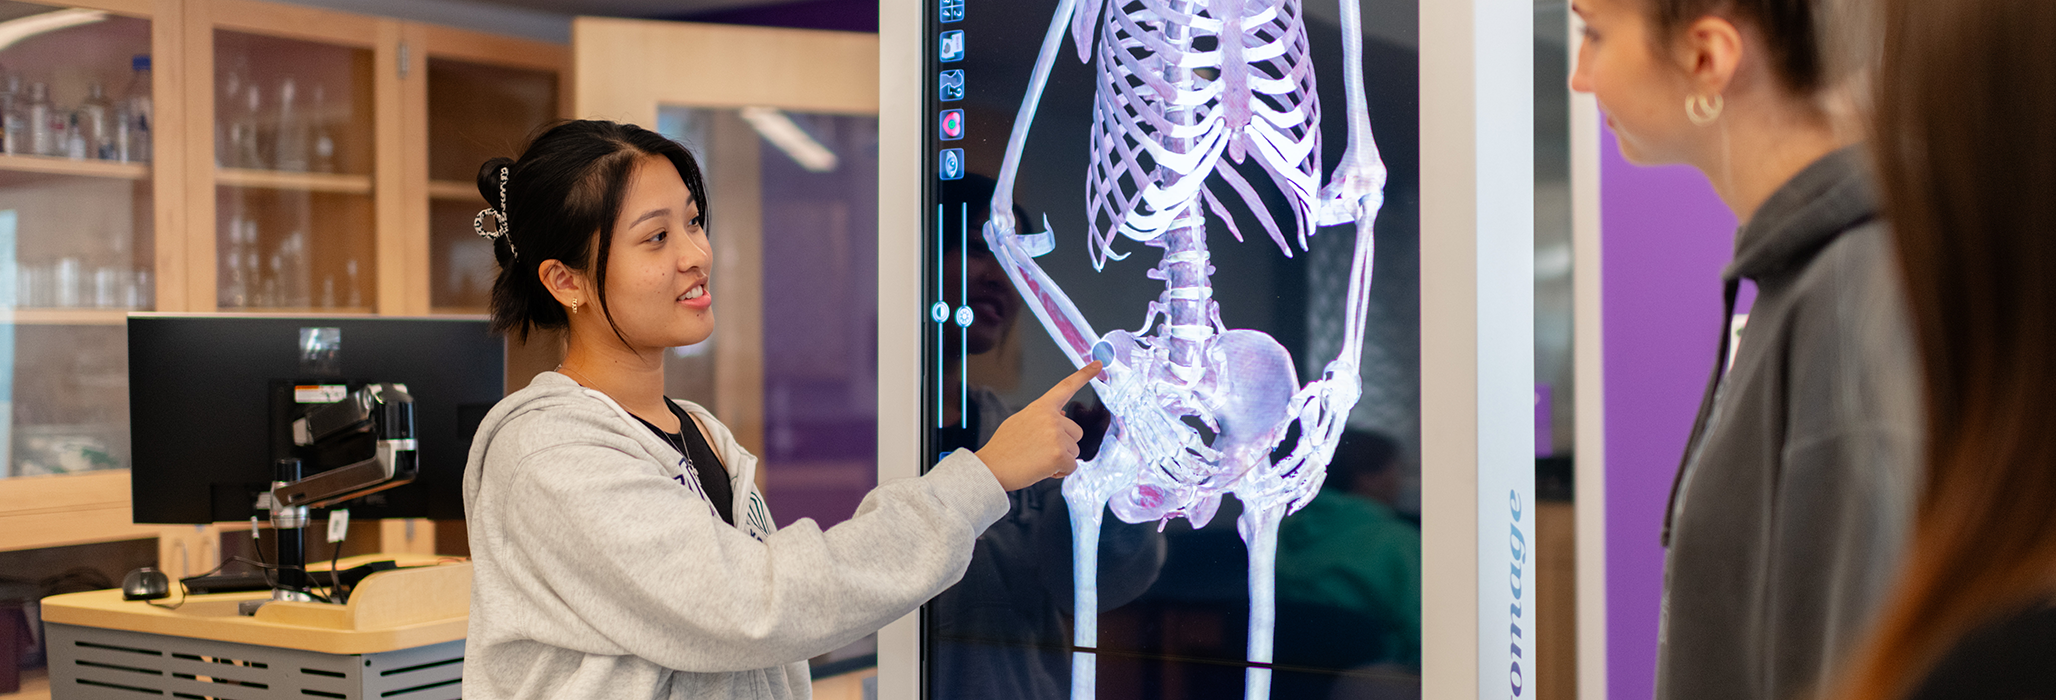 Students interact with the anatomage table at the Curry College Science and Research Center